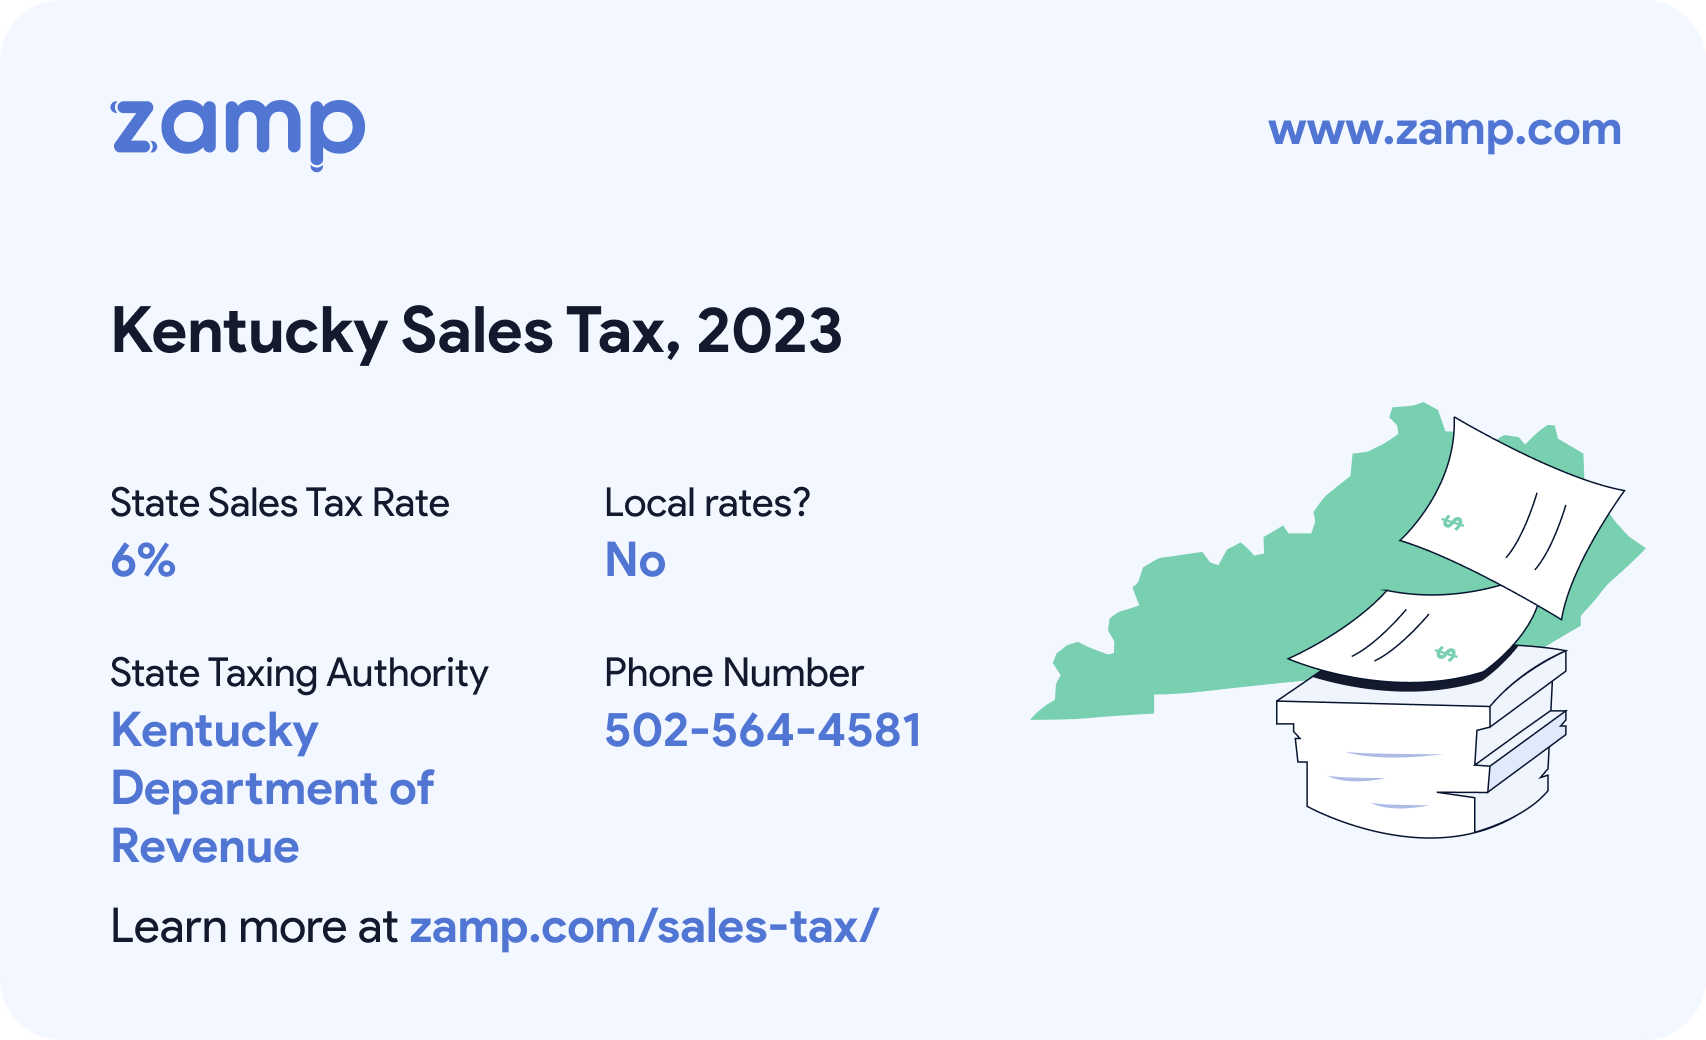 Kentucky basic sales tax info for 2023 - State sales tax rate: 6%, Local rates? No; State Taxing Authority: Kentucky Department of Revenue; and phone number 502-564-4581